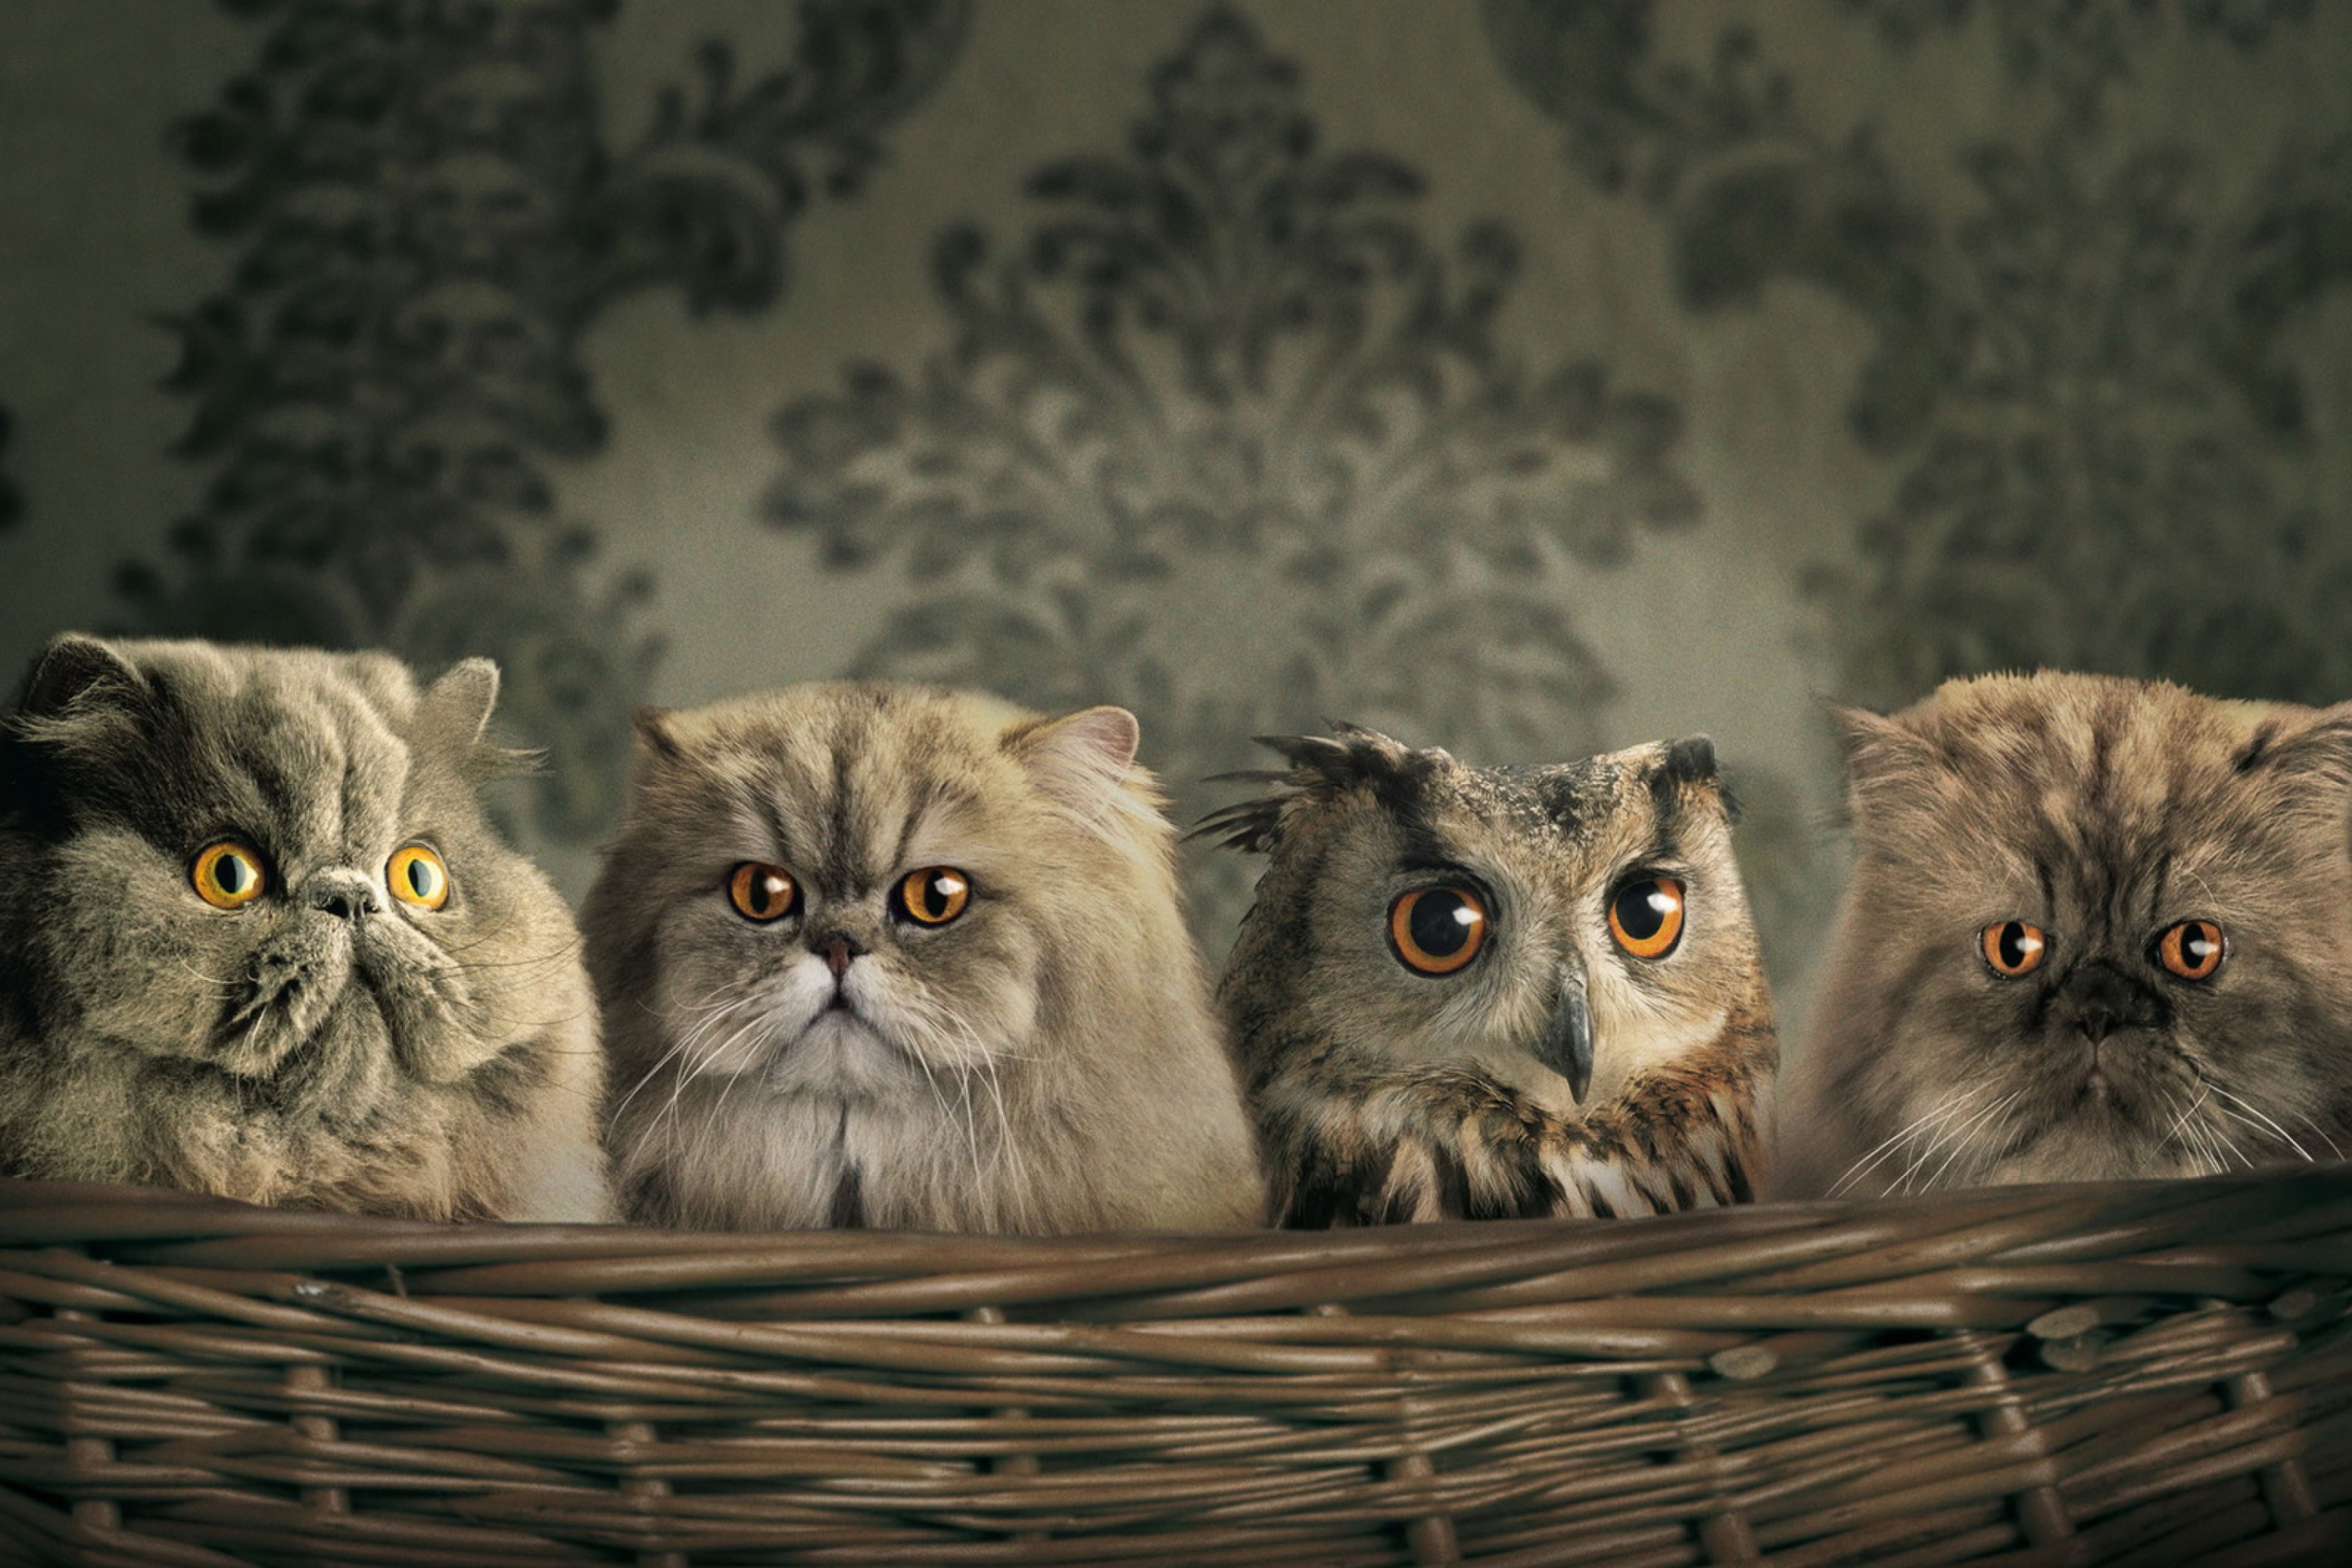 Cats and Owl as Third Wheel wallpaper 2880x1920